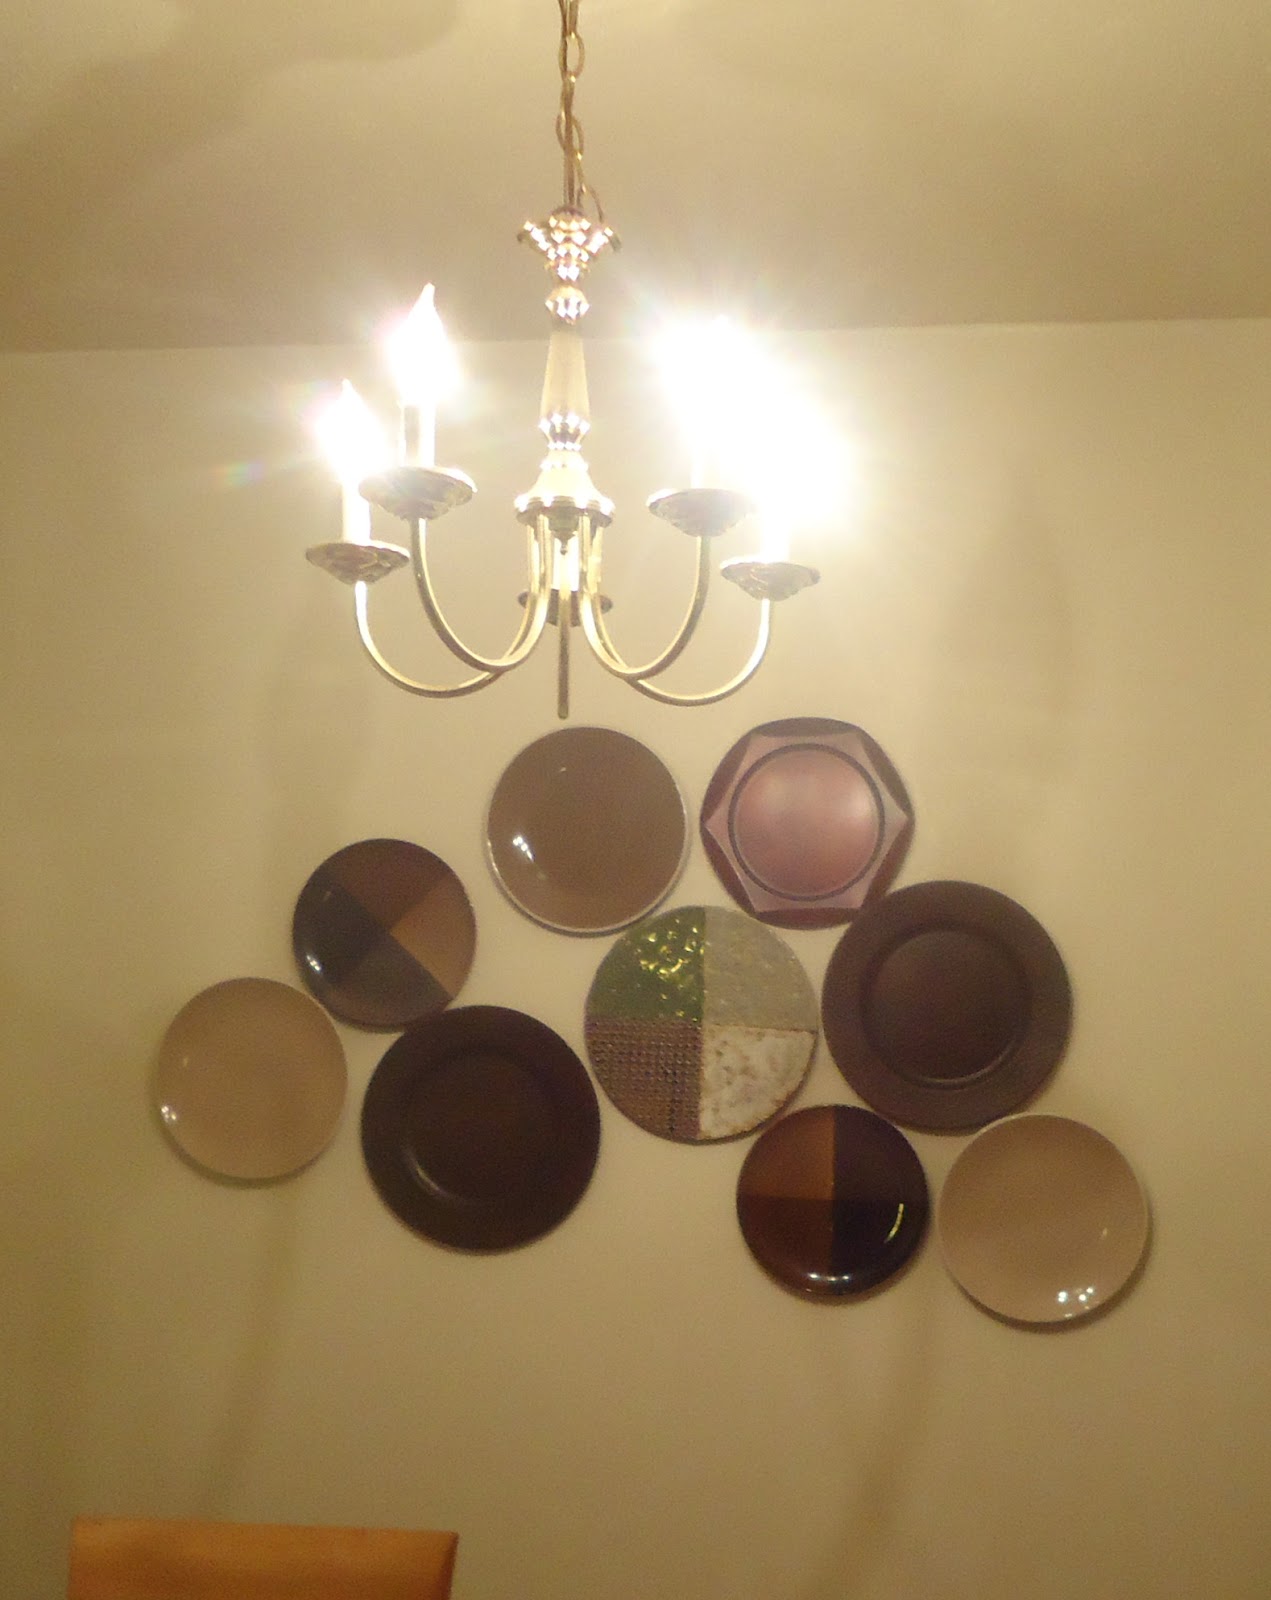 Wall Hanging Plates - Photos All Recommendation